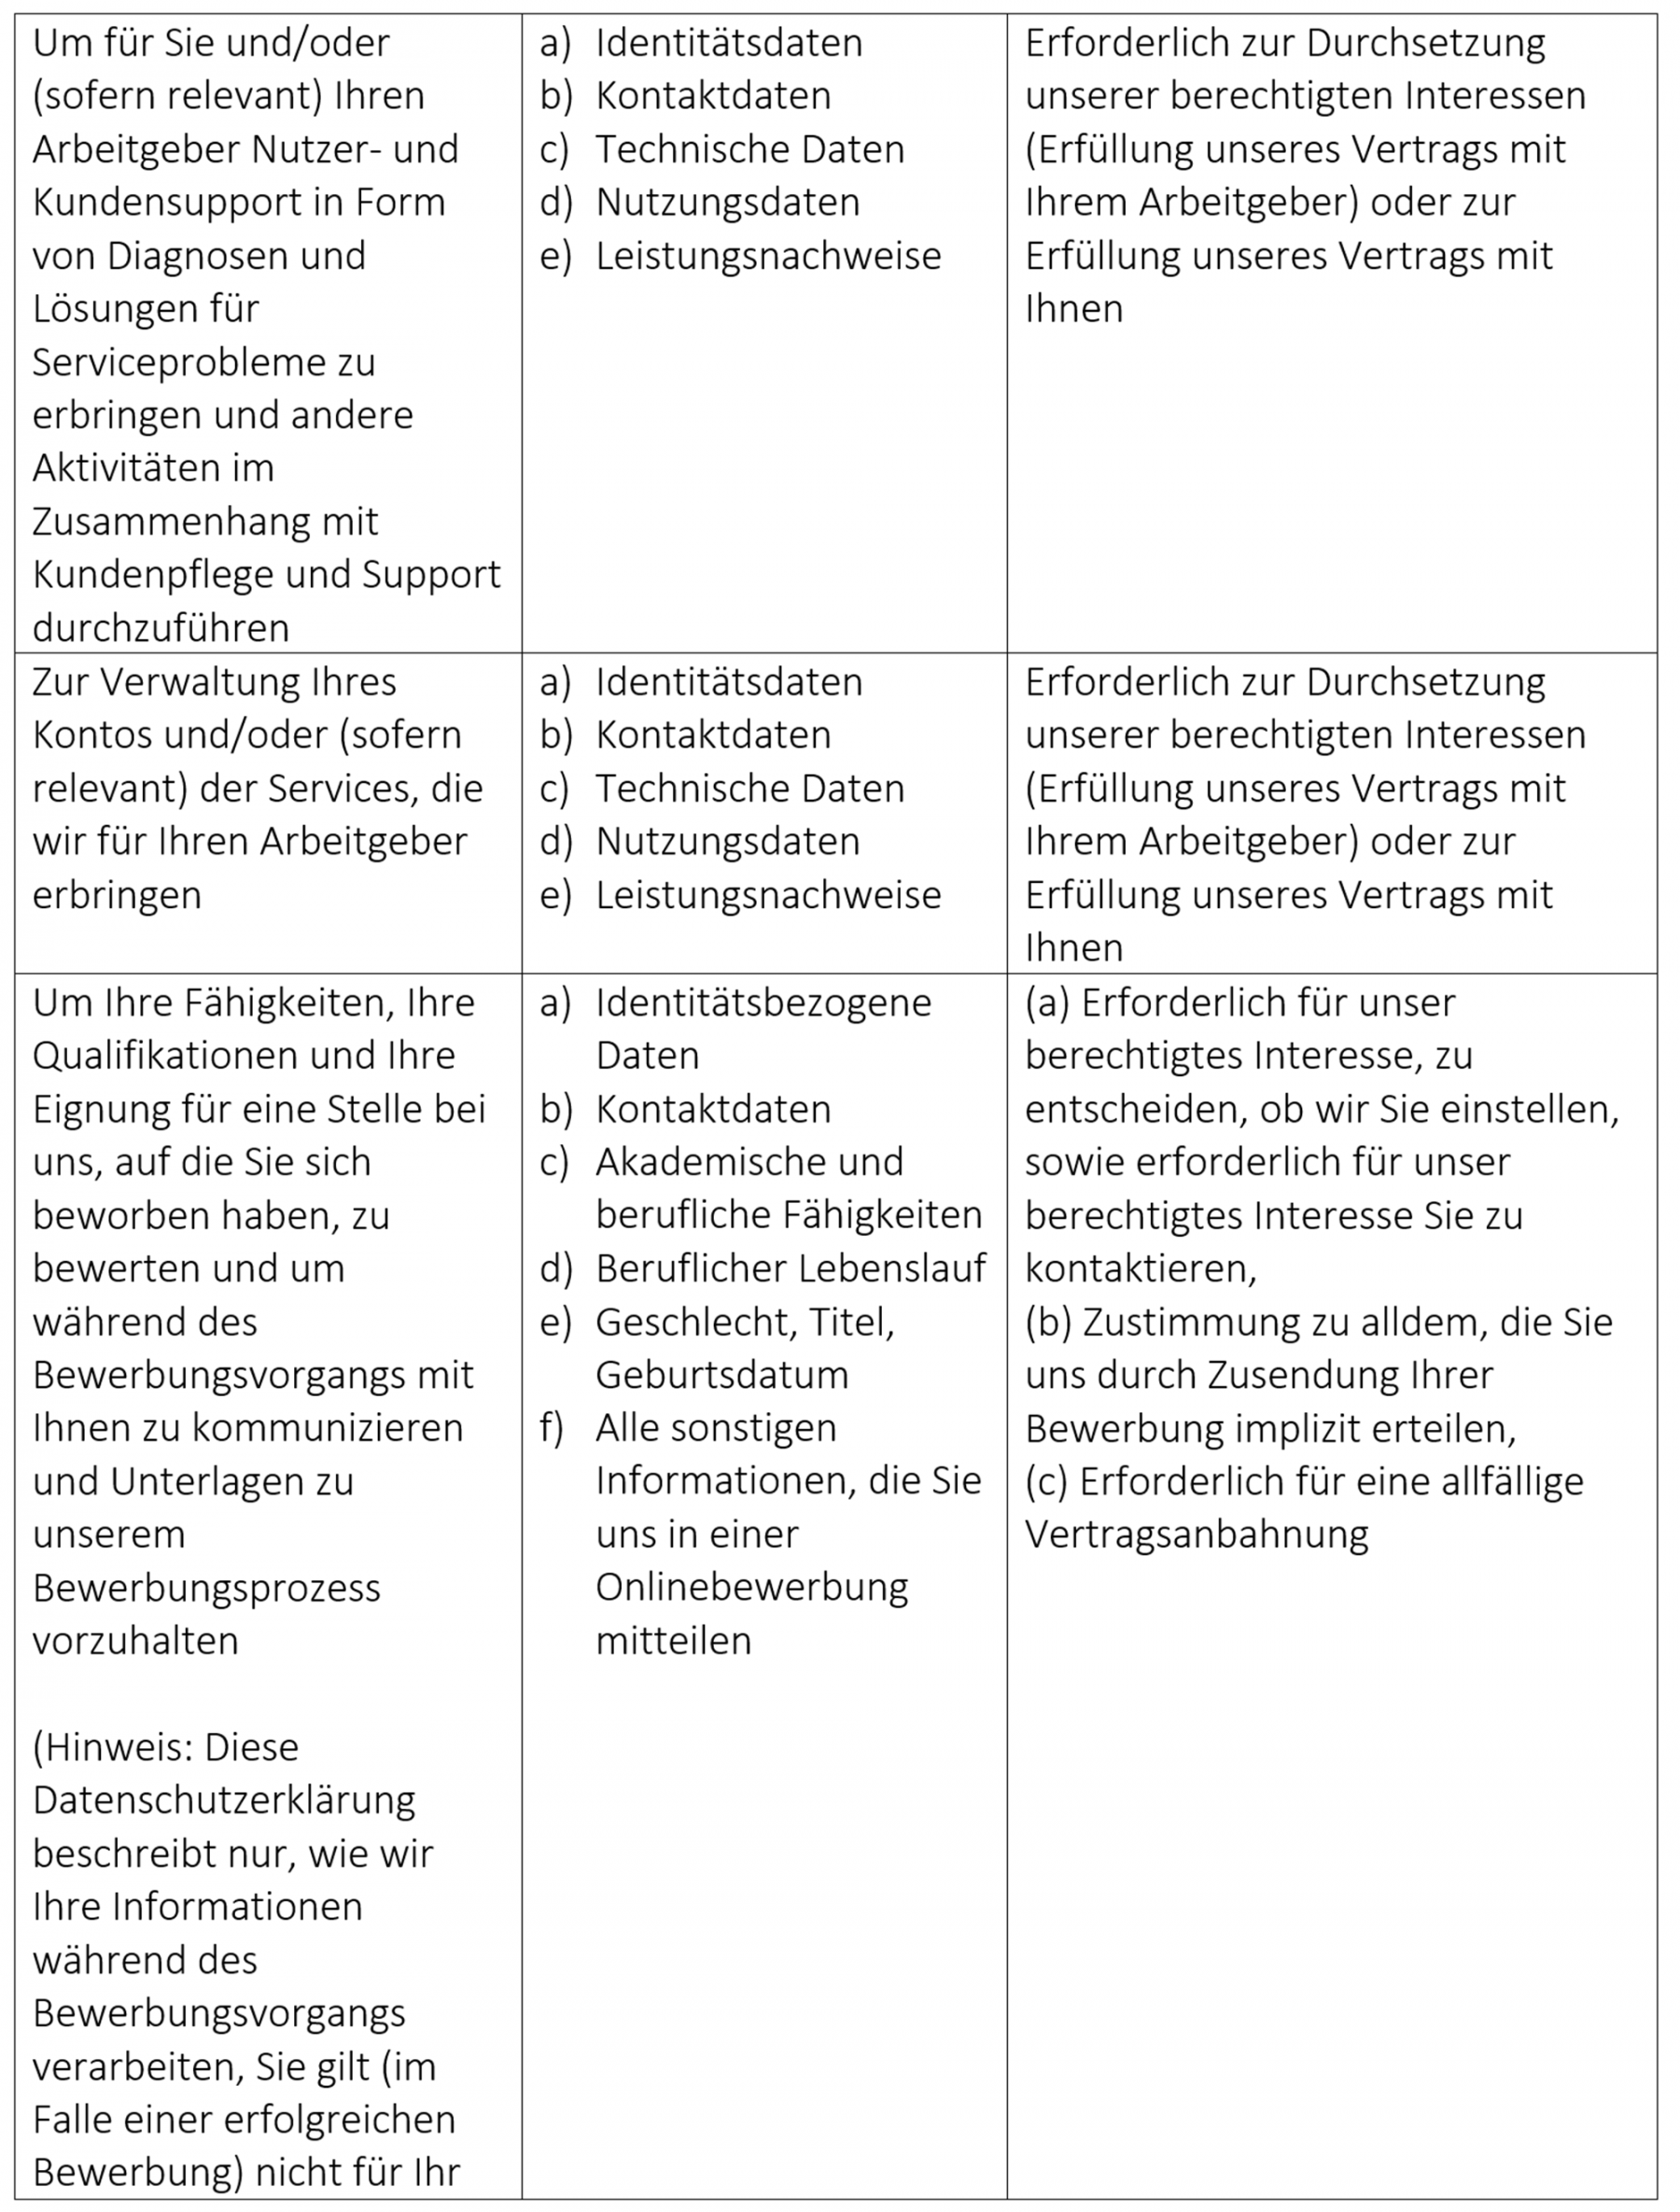 German Privacy Policy Table Image 3 docx